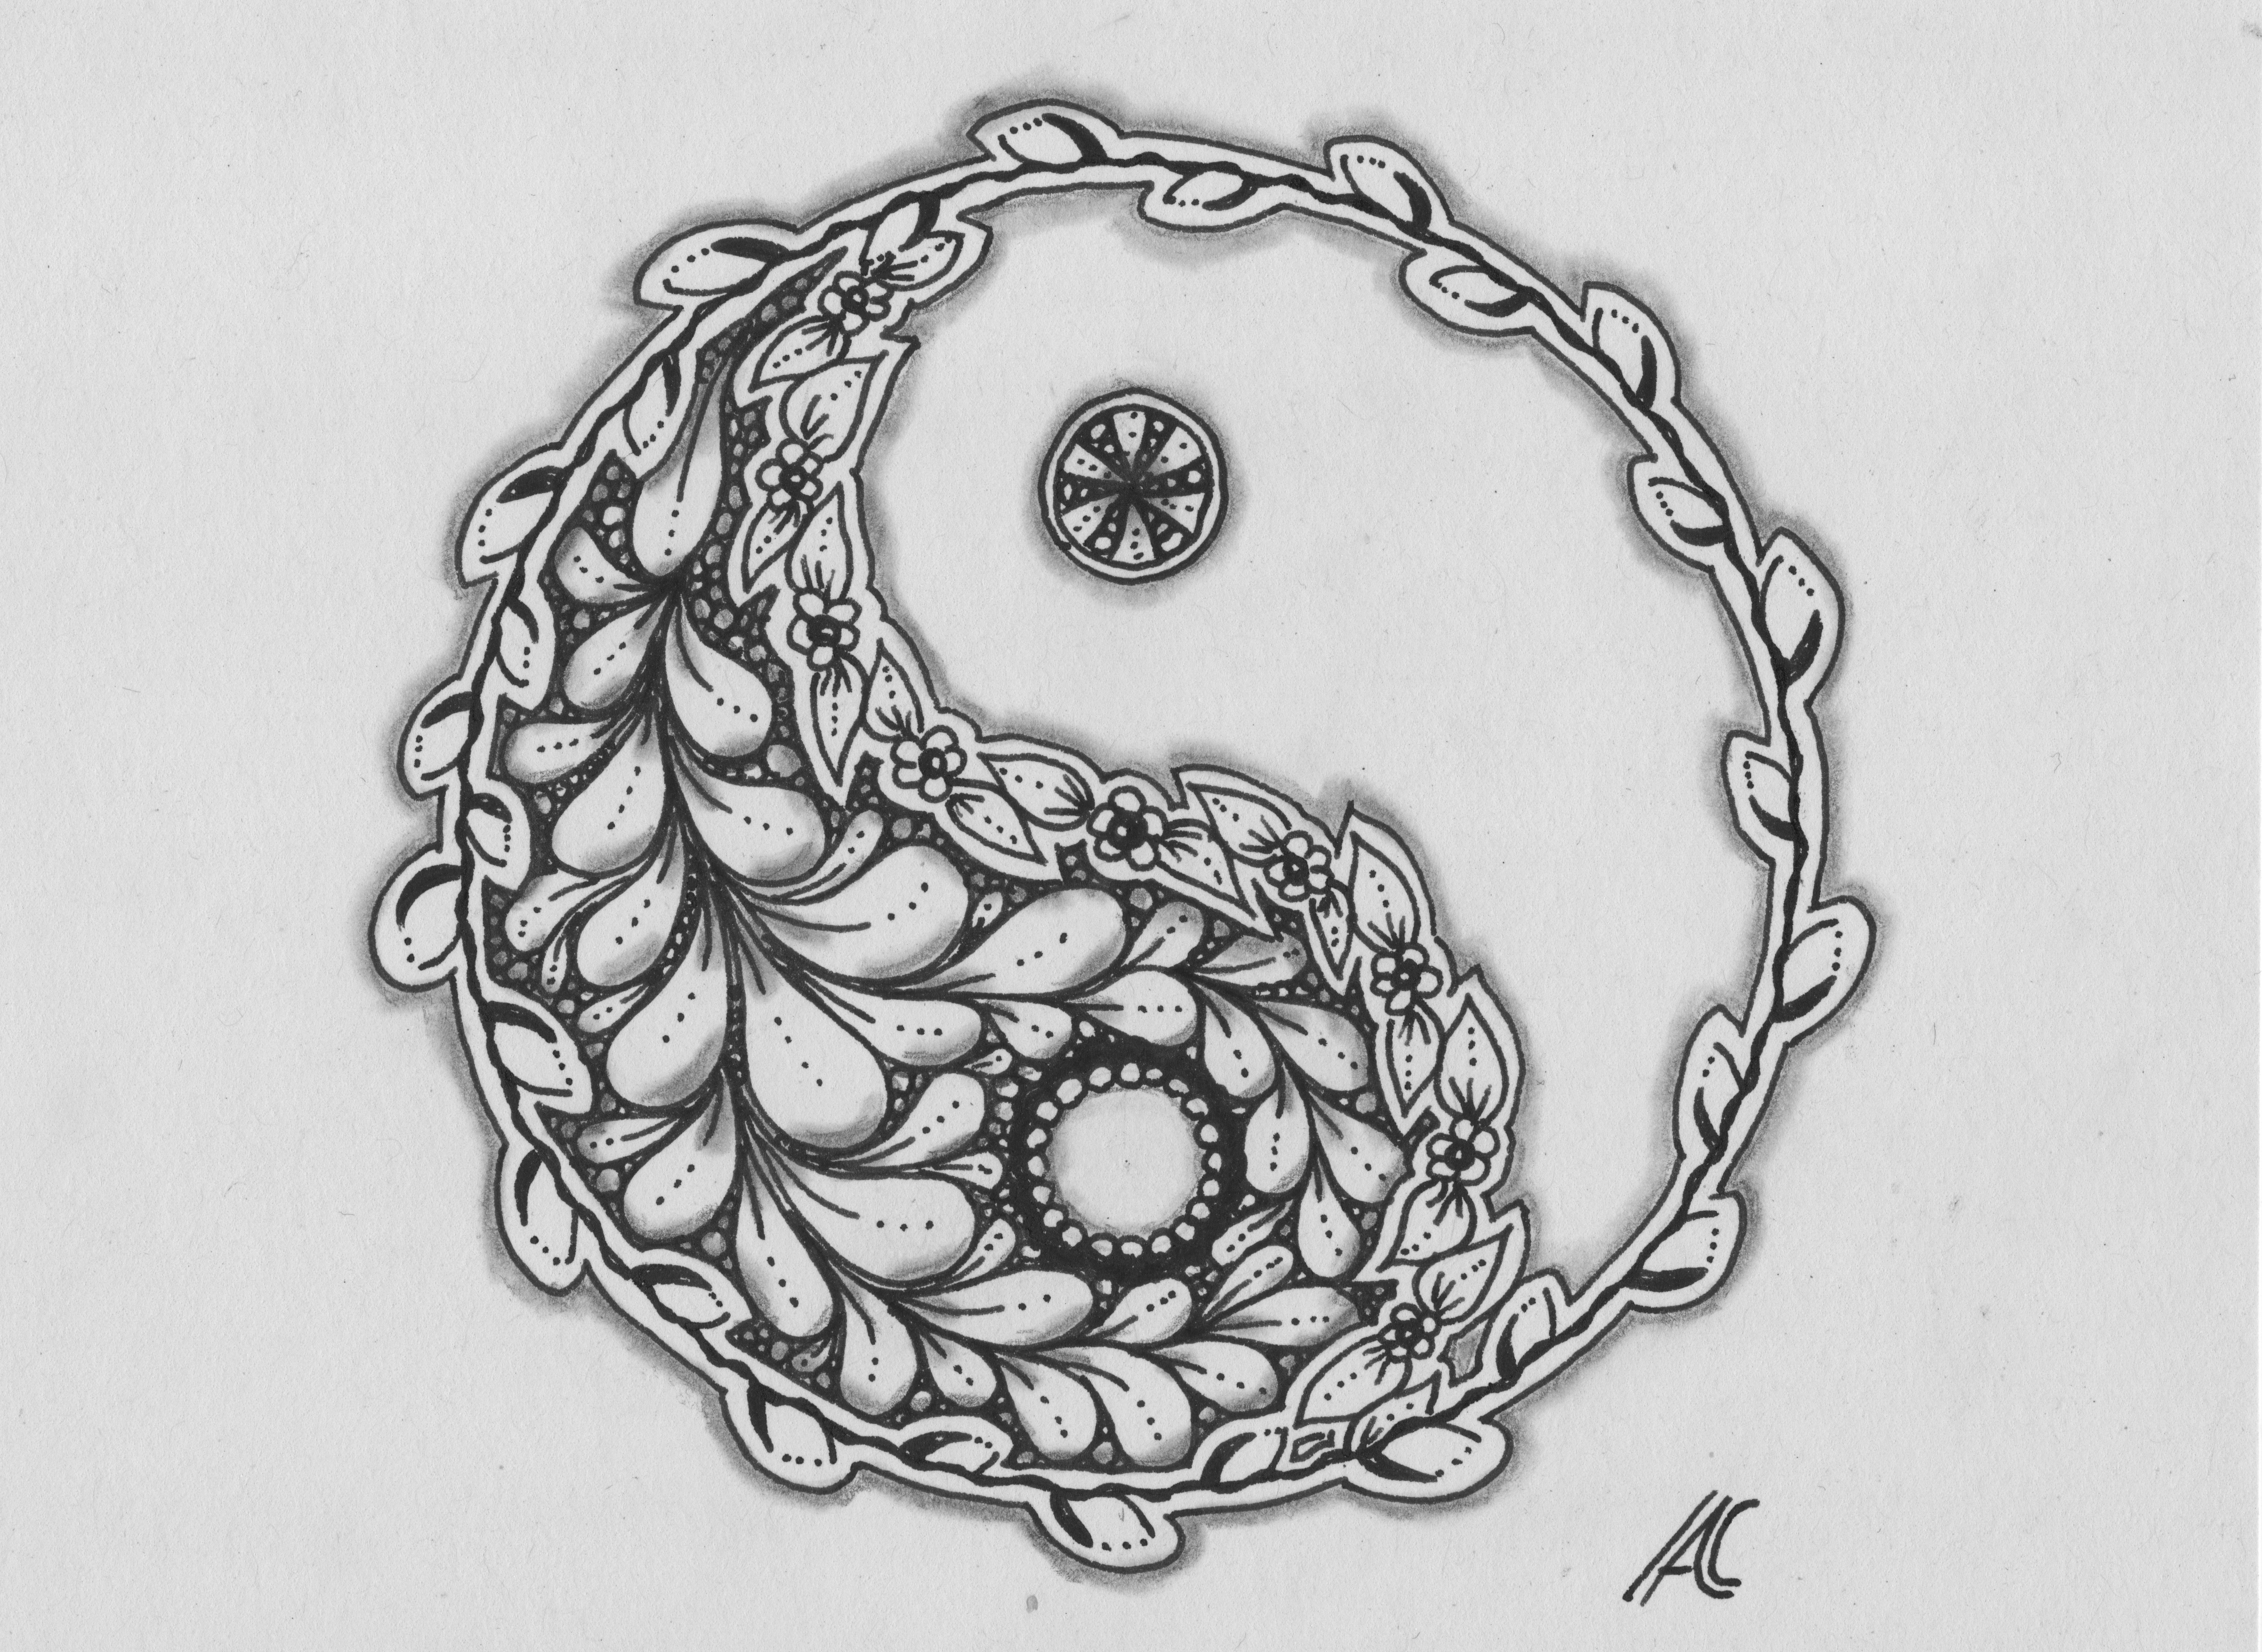 spring quinox: a balck and white drawing in a yin yang shape. One half is empfty, the other is filled with leaves.